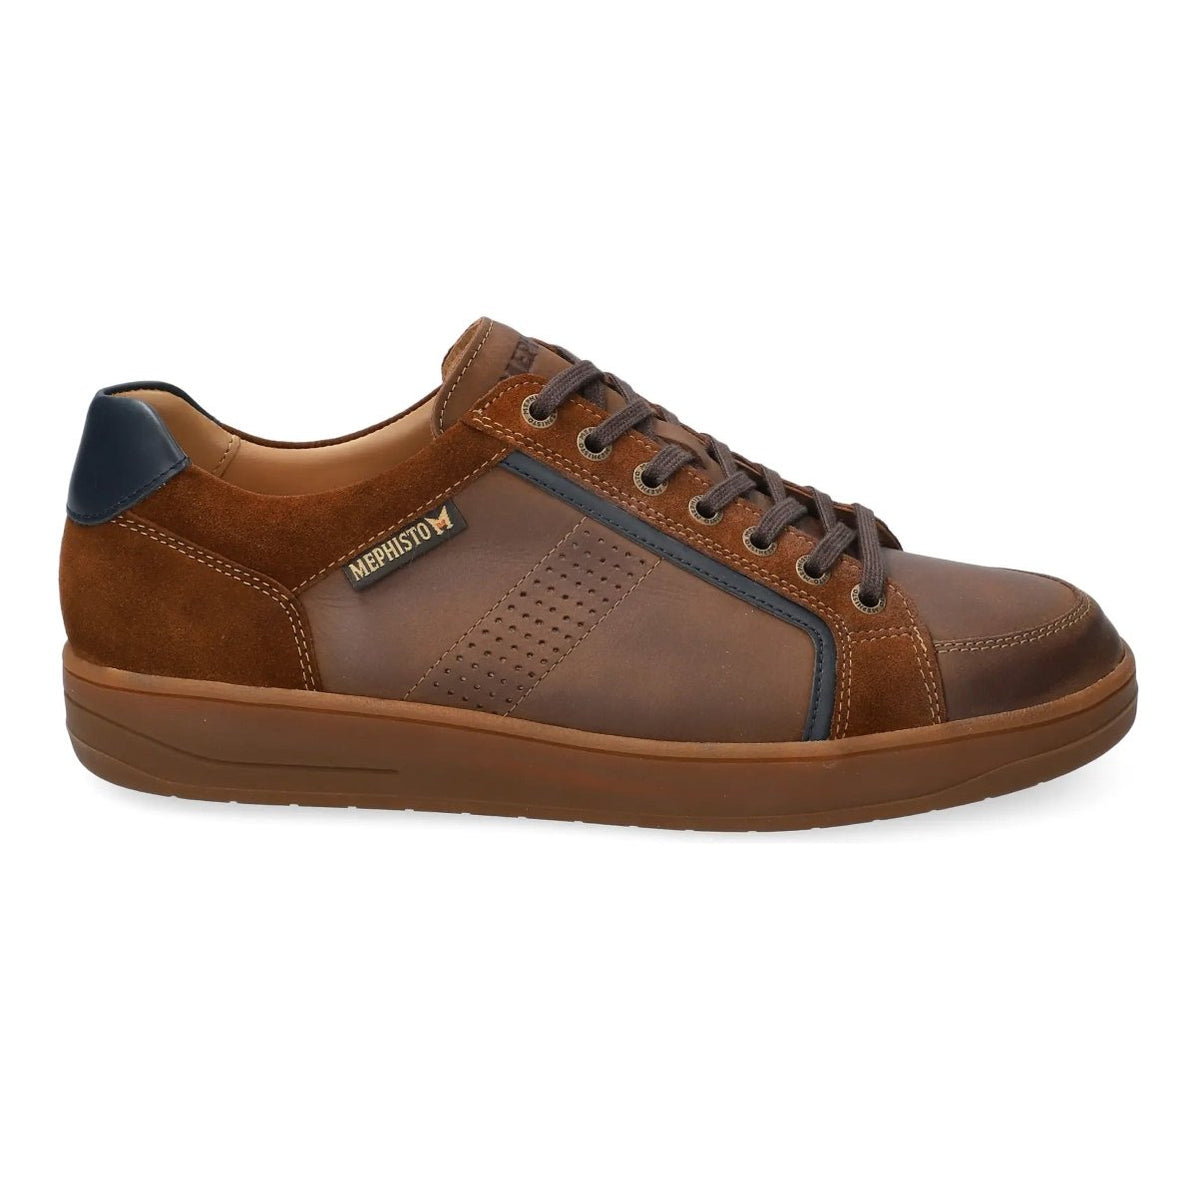 Mephisto Men's Harrison Tobacco - Tip Top Shoes of New York